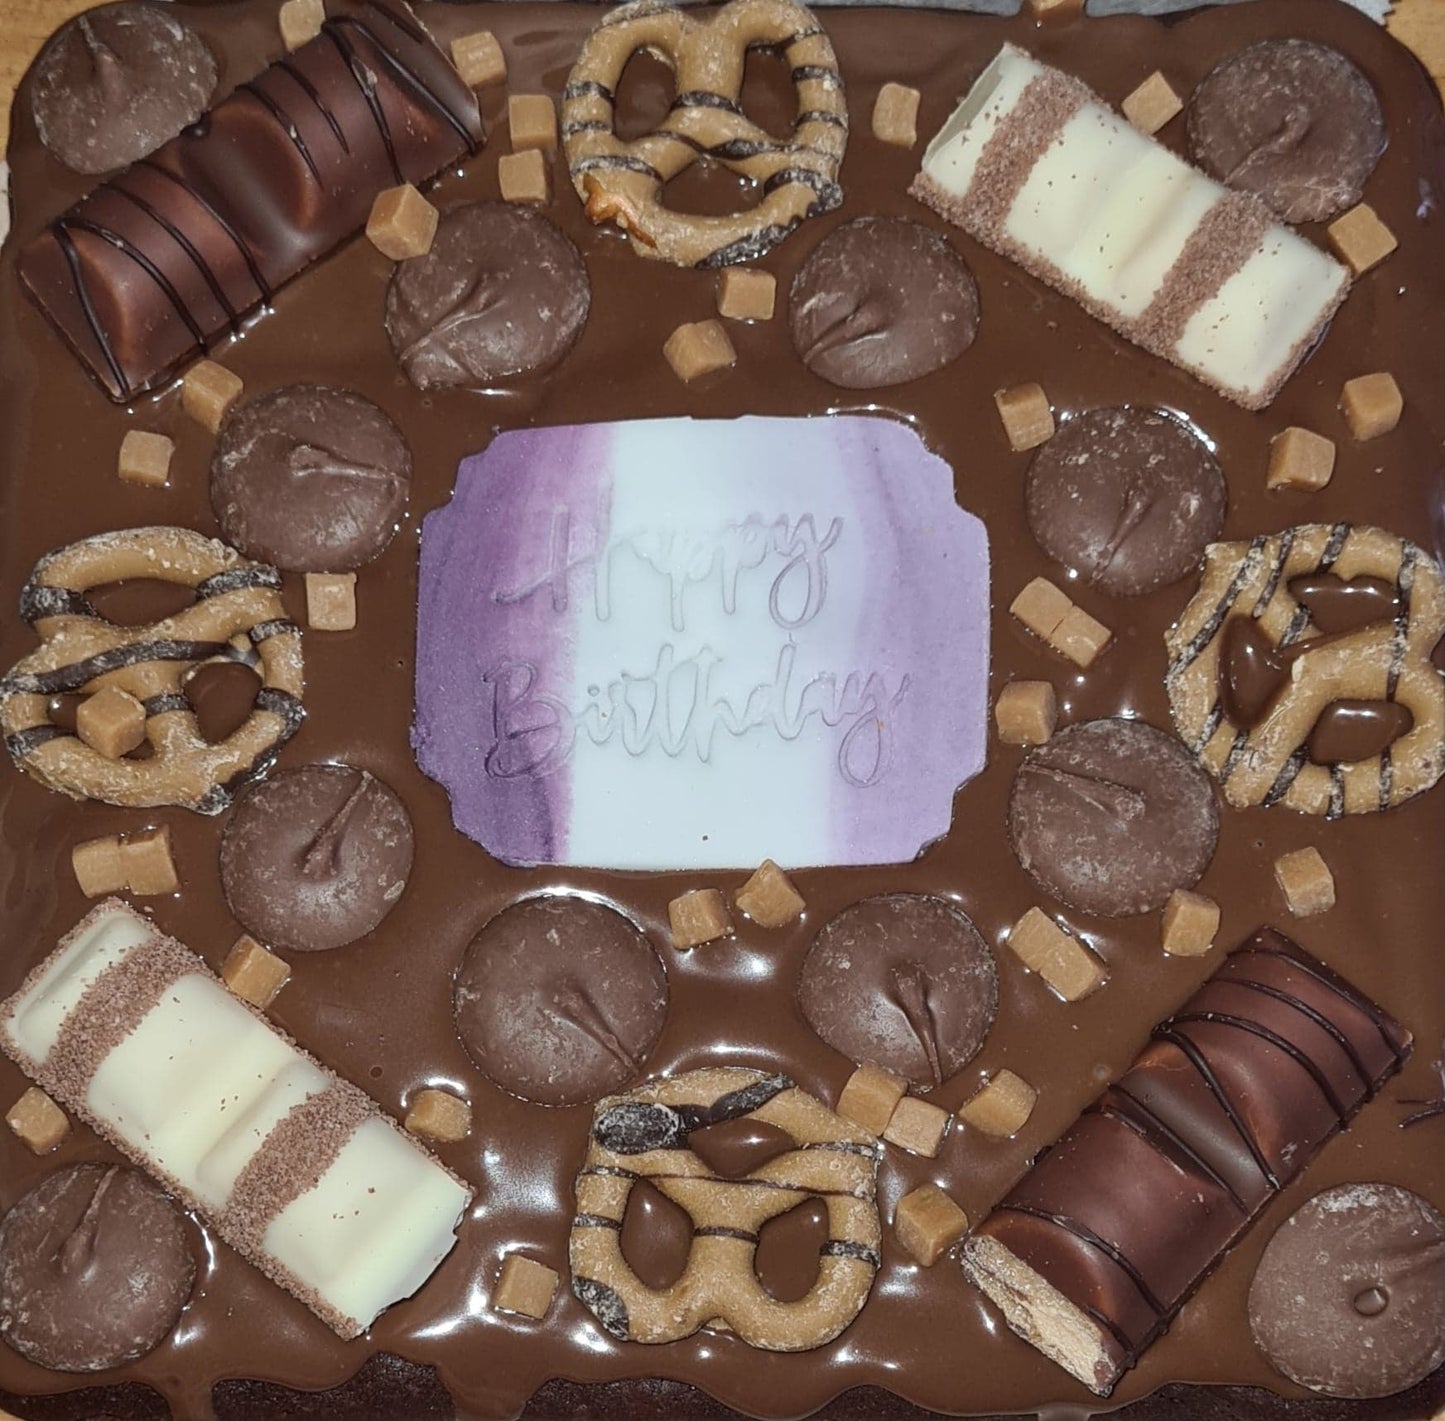 A happy birthday brownie tray, with kinder bueno, Cadburys chocolate buttons, fudge and pretzels!